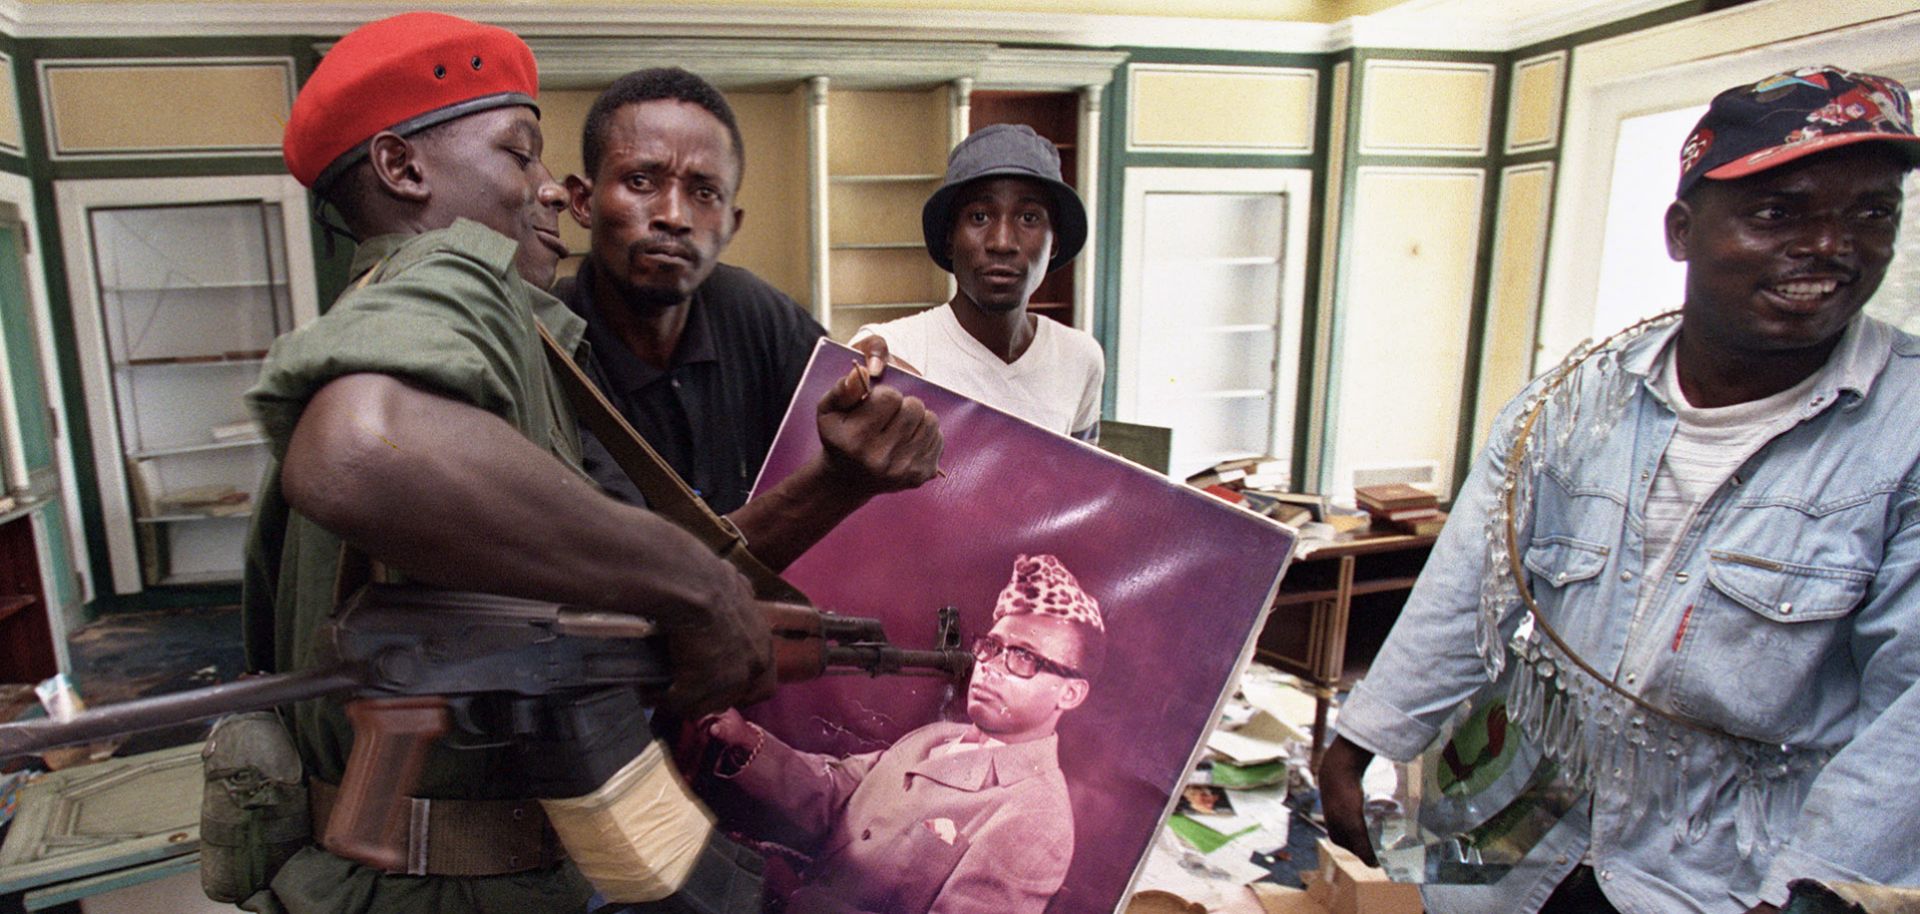 A Congolese rebel alliance soldier surrounded by looters in Kinshasa prods a photograph of ousted Zairean President Mobutu Sese Seko in 1997. African populations are demanding more from their leaders, and not all leaders are prepared to give it.